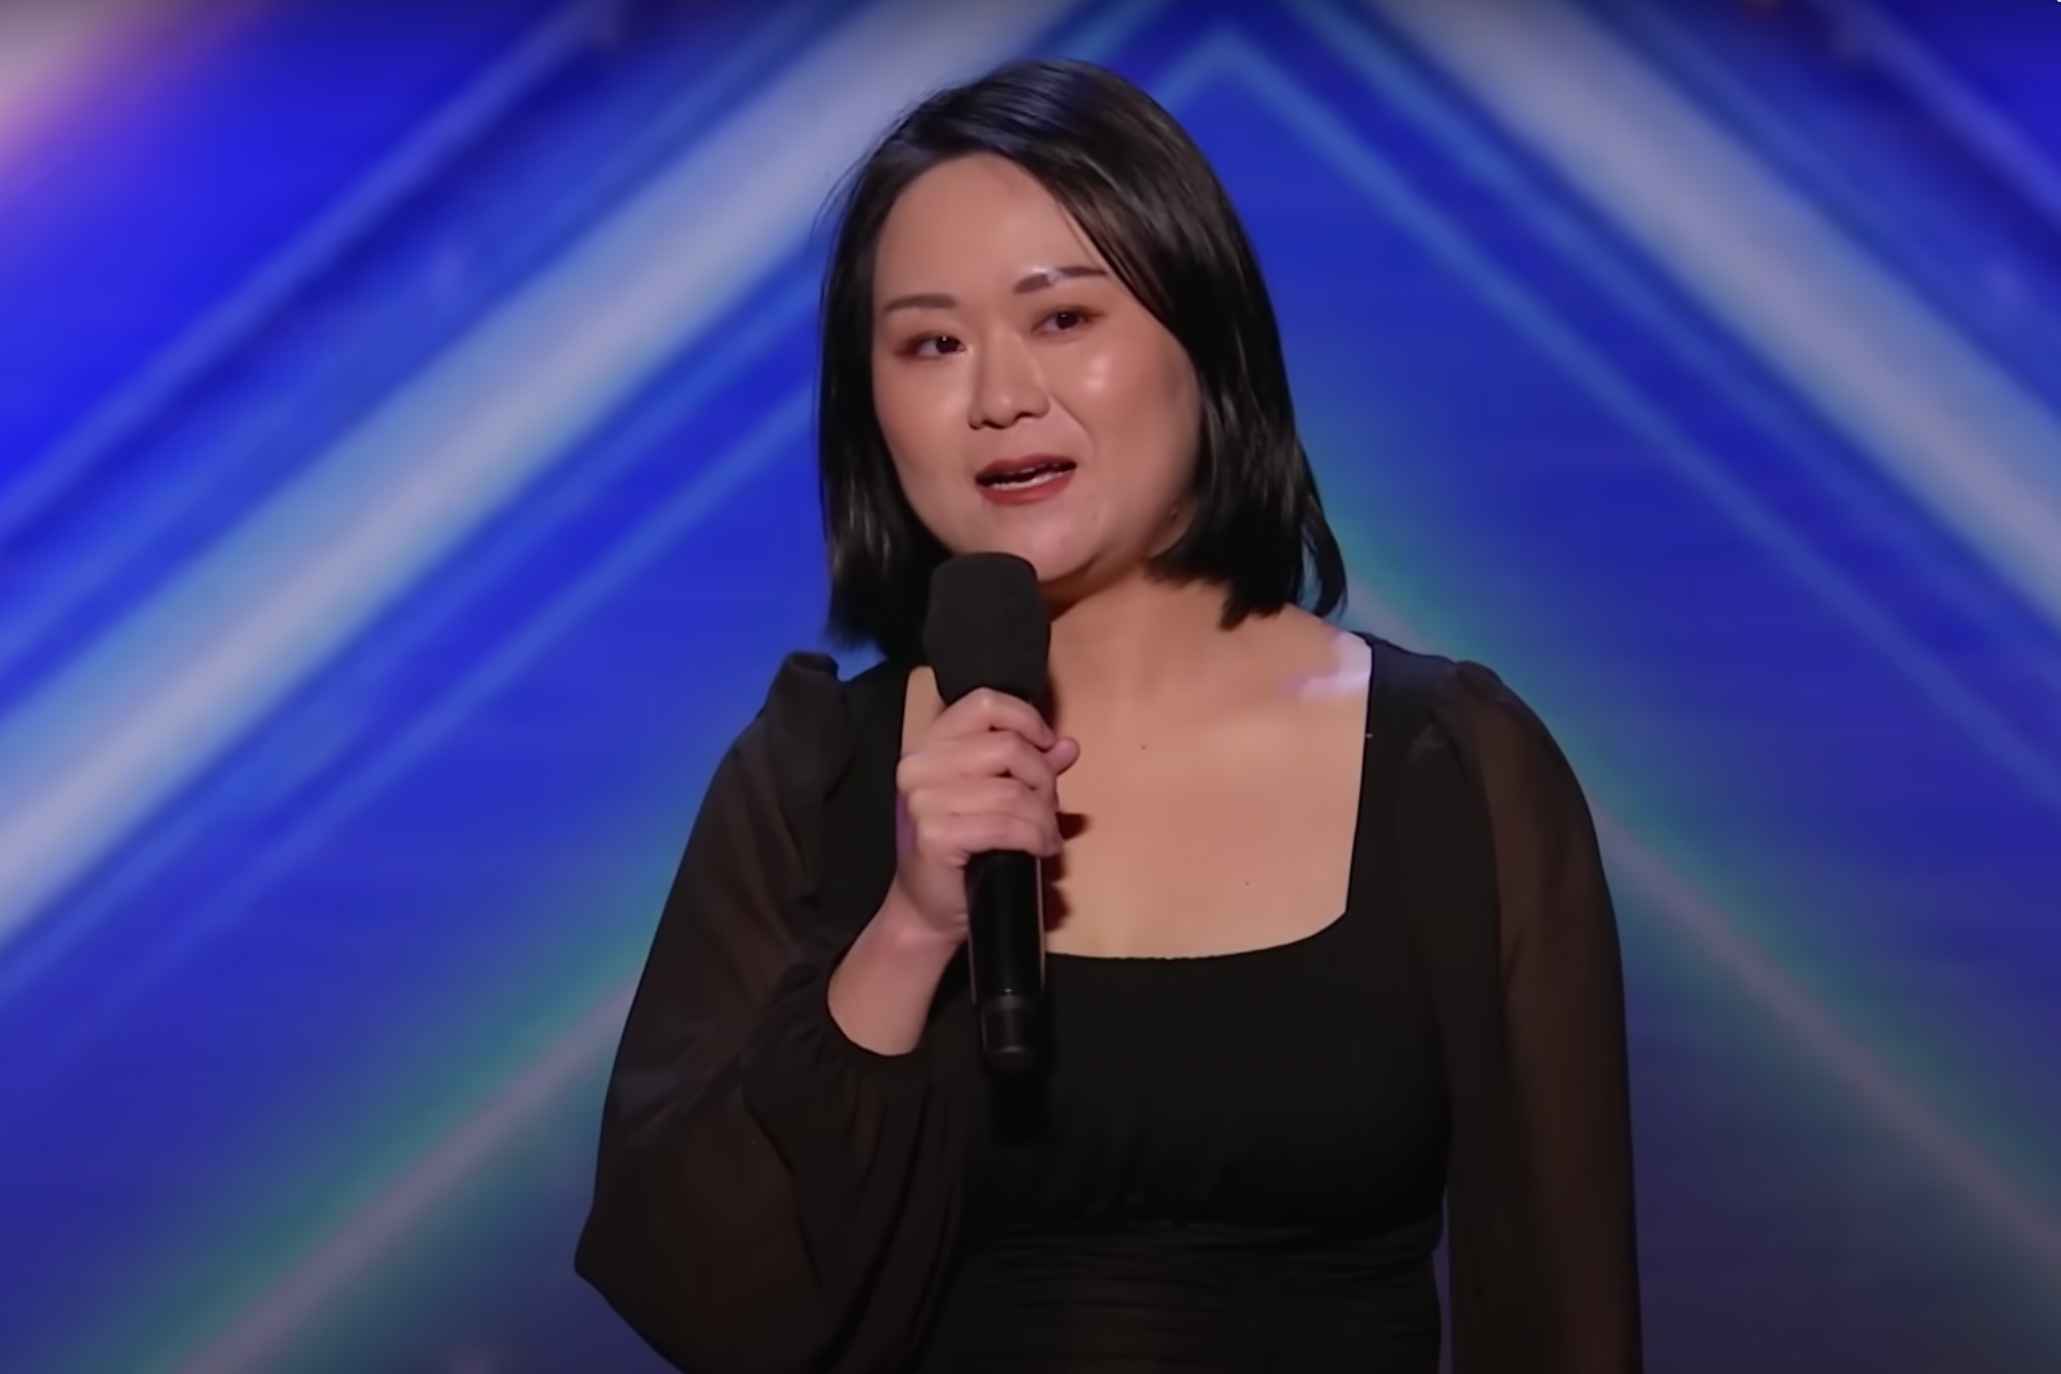 She wears straight black hair down to her shoulders and a simple black blouse, a microphone in her hand and a sparkly blue backdrop behind her